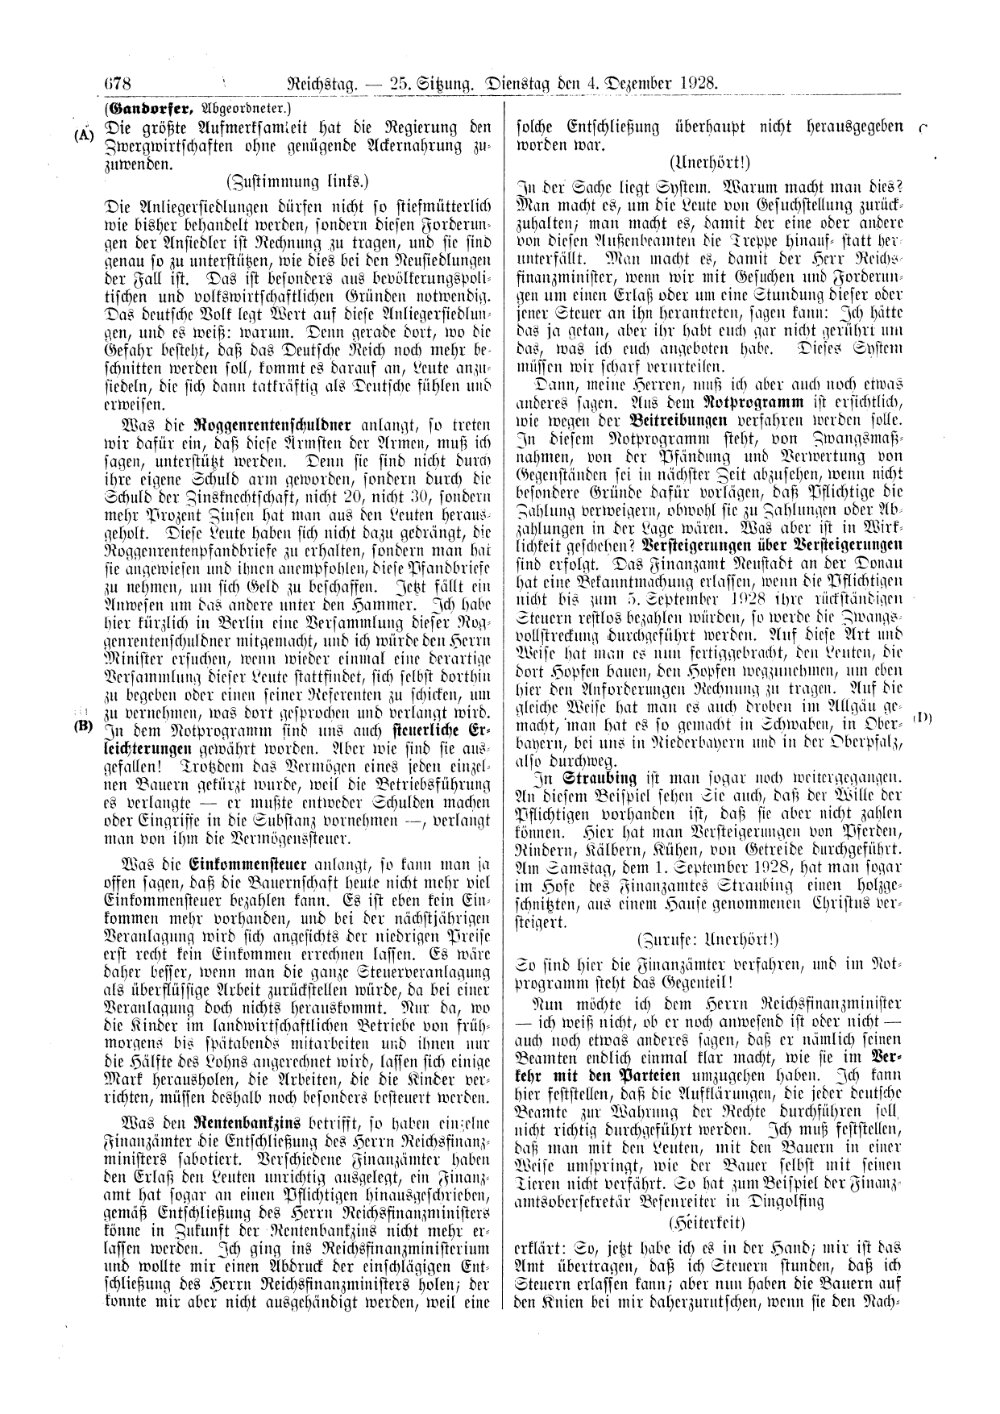 Scan of page 678